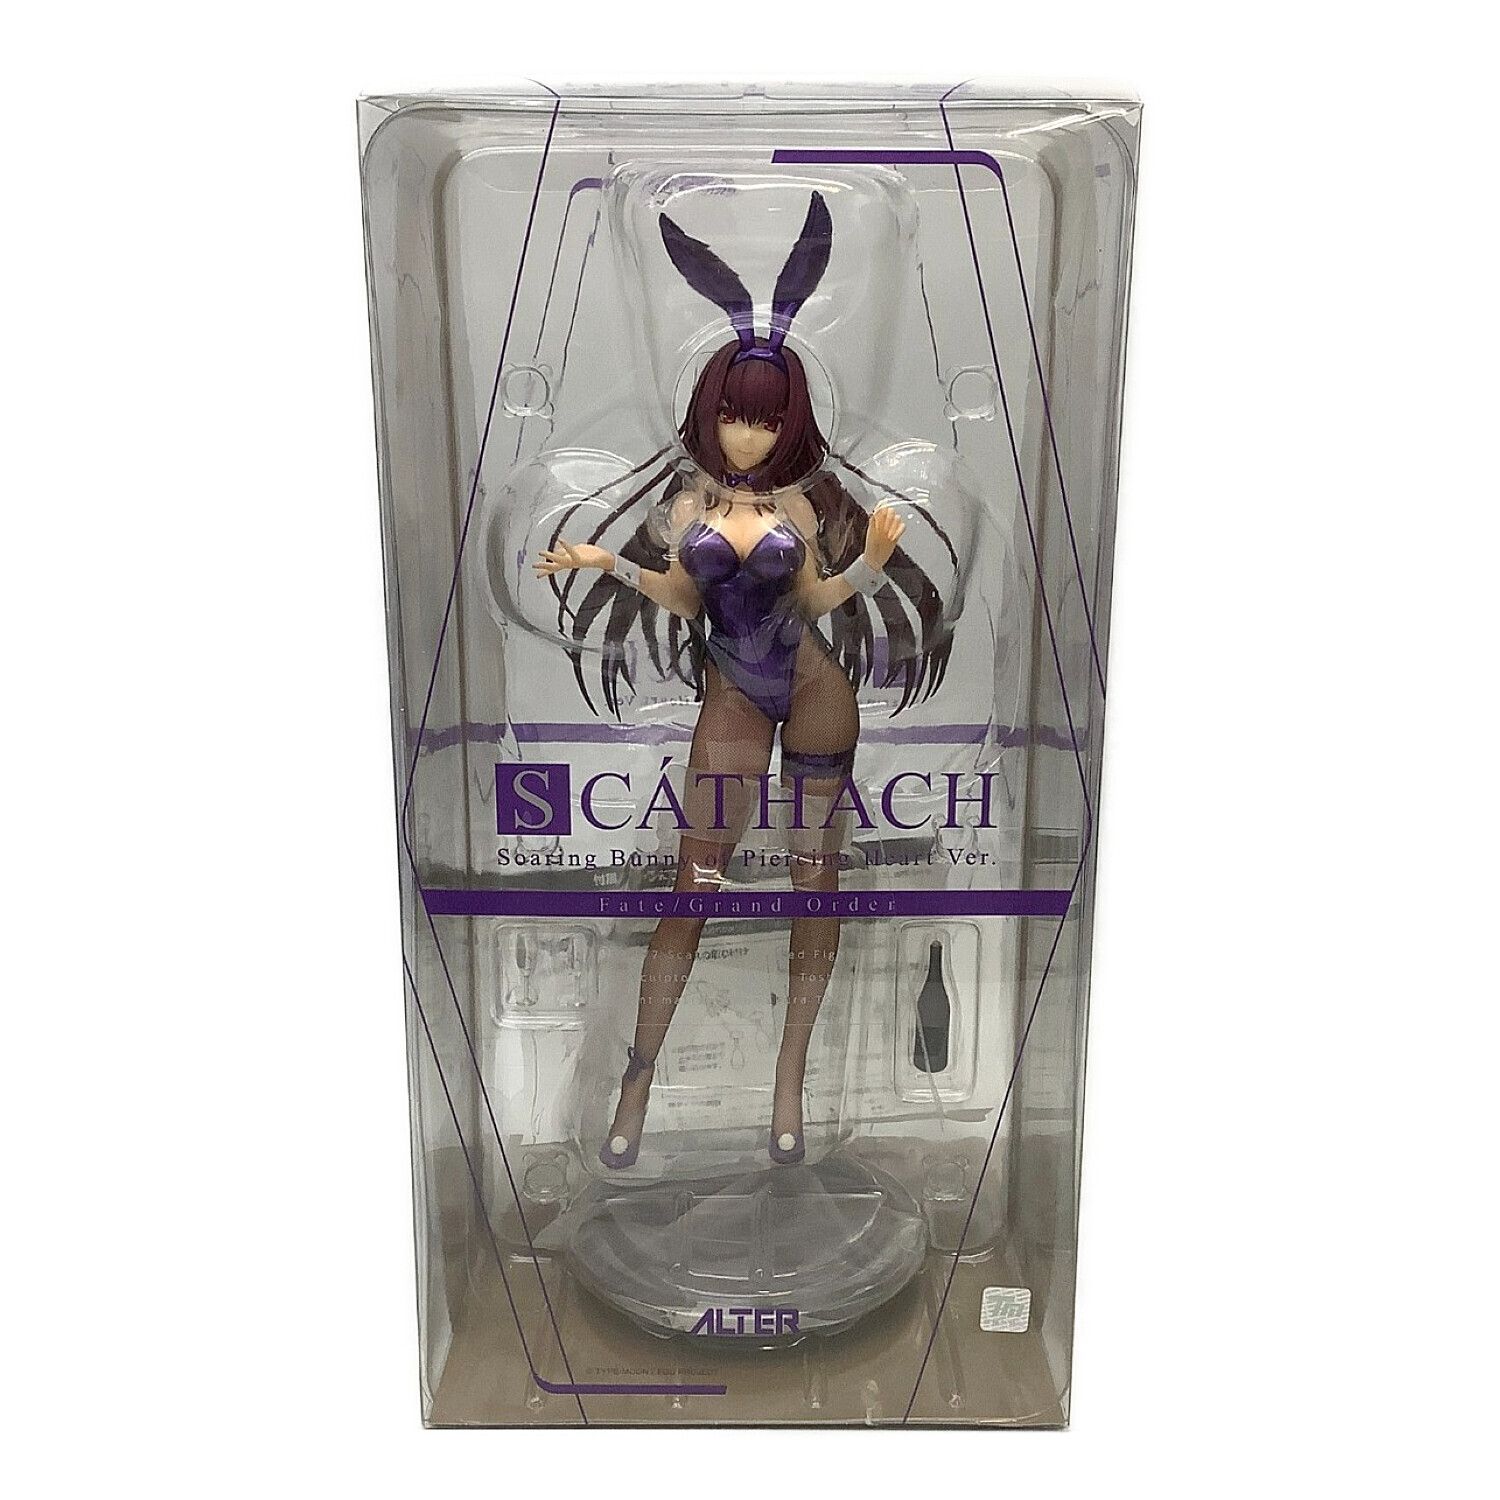 ALTER (アルター) SCATHACH SOARING BUNNY OF PIERCING HEART VER